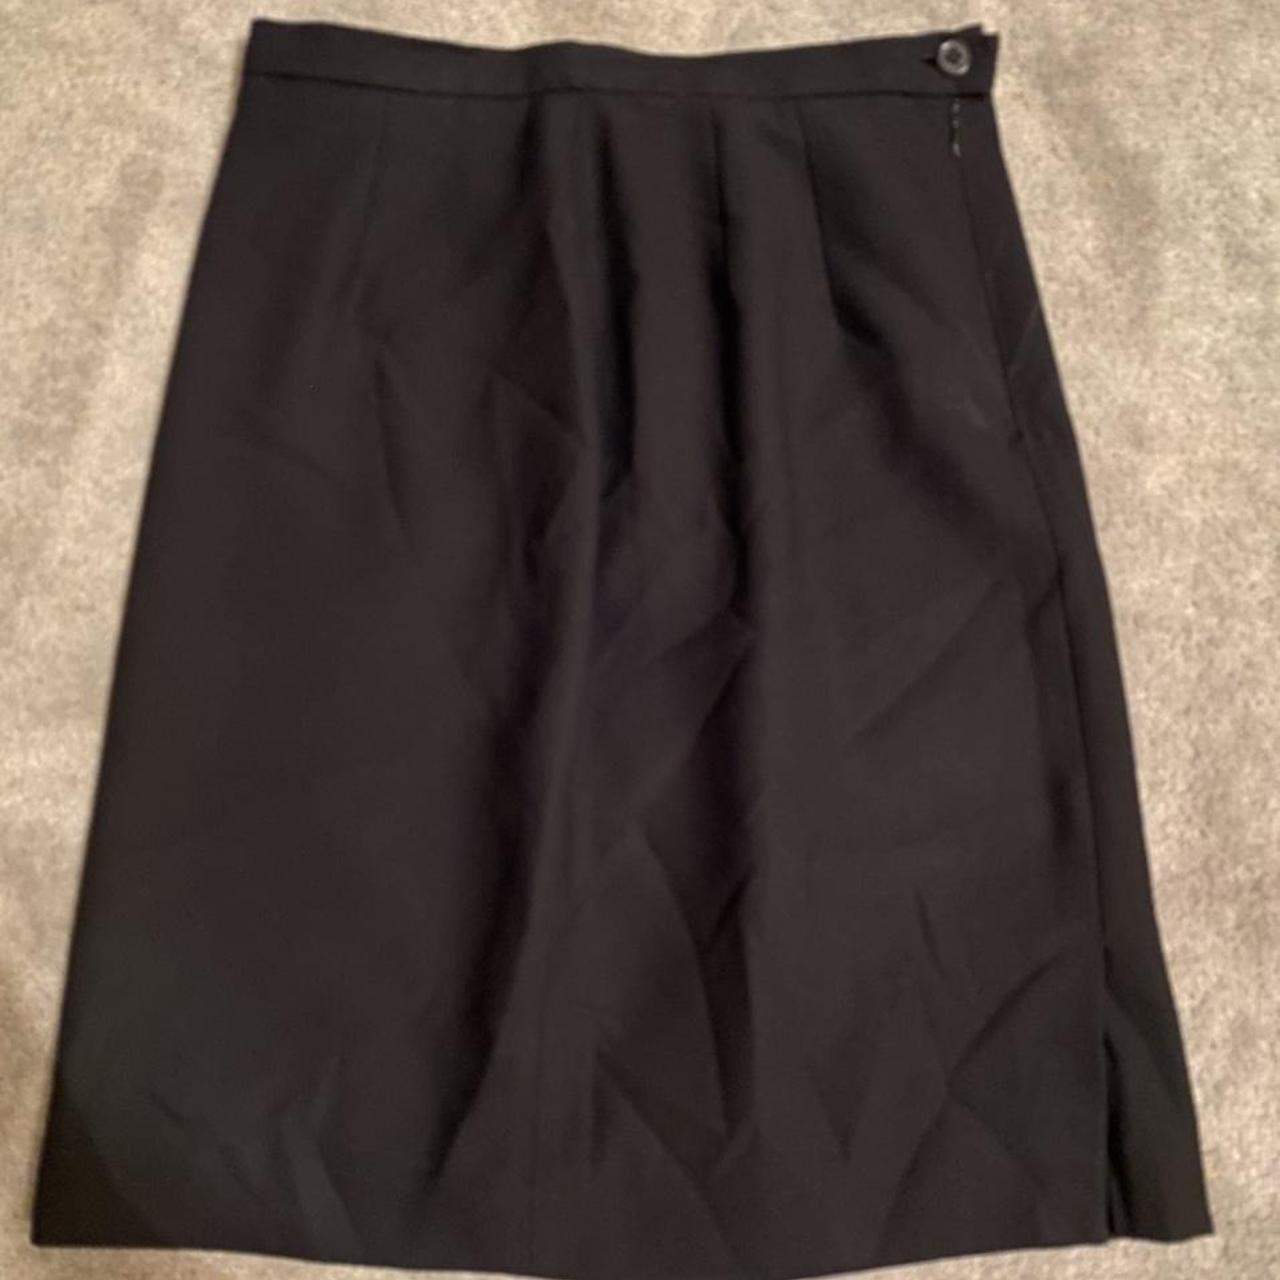 Product Image 1 - Black skirt 
brand: unknown bought